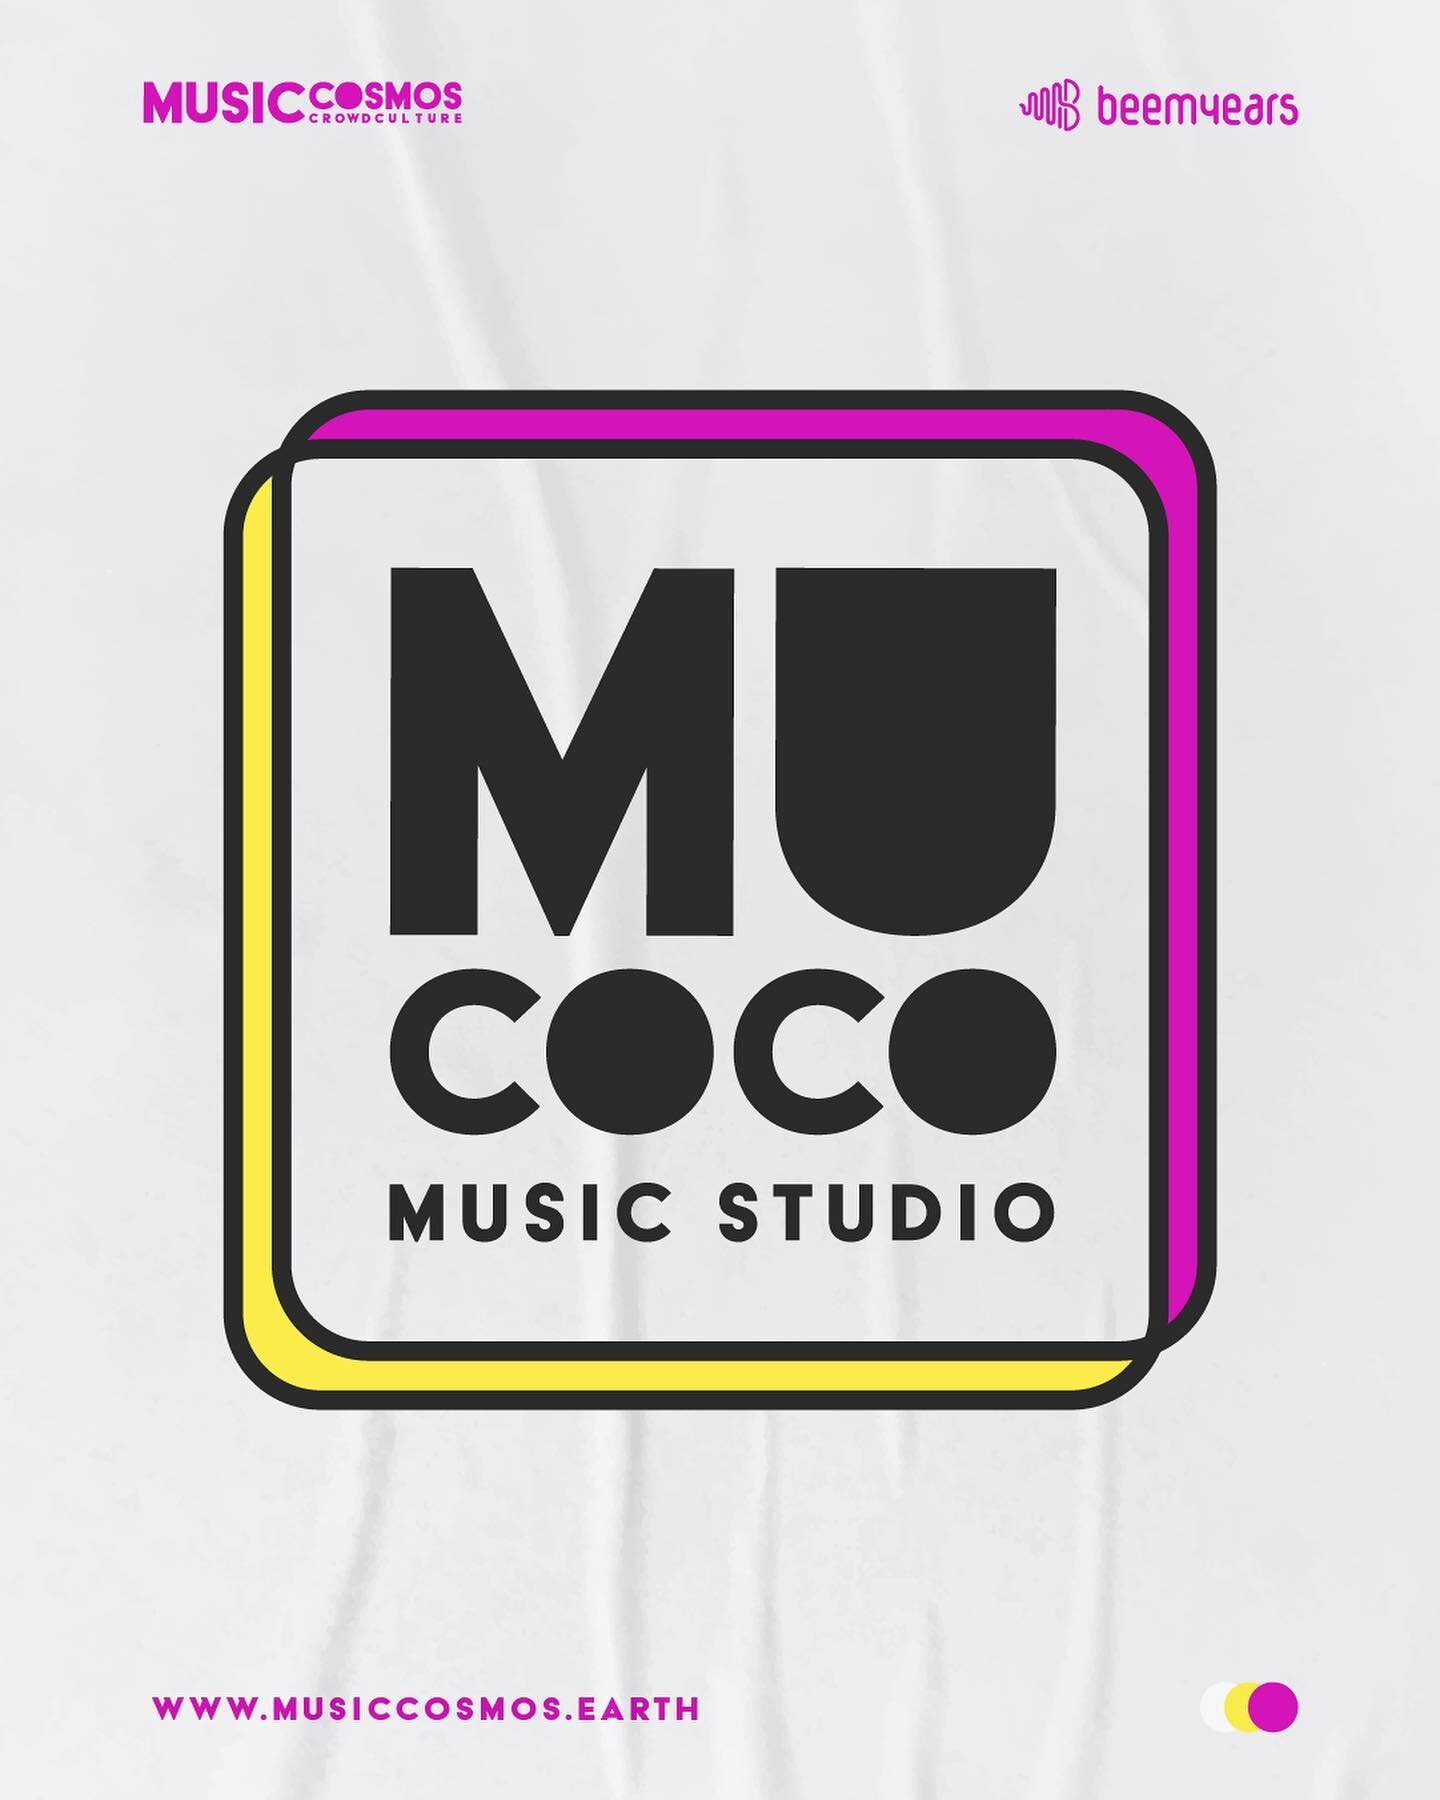 MUSIC COSMOS COLLECTIVE - top music creators getting together to deliver the most sought-after genres, styles, productions, arrangements and strategies for film, tv, games &amp; advertising. Coming soon!

@musiccosmos.earth @beemyears #MUCOCO